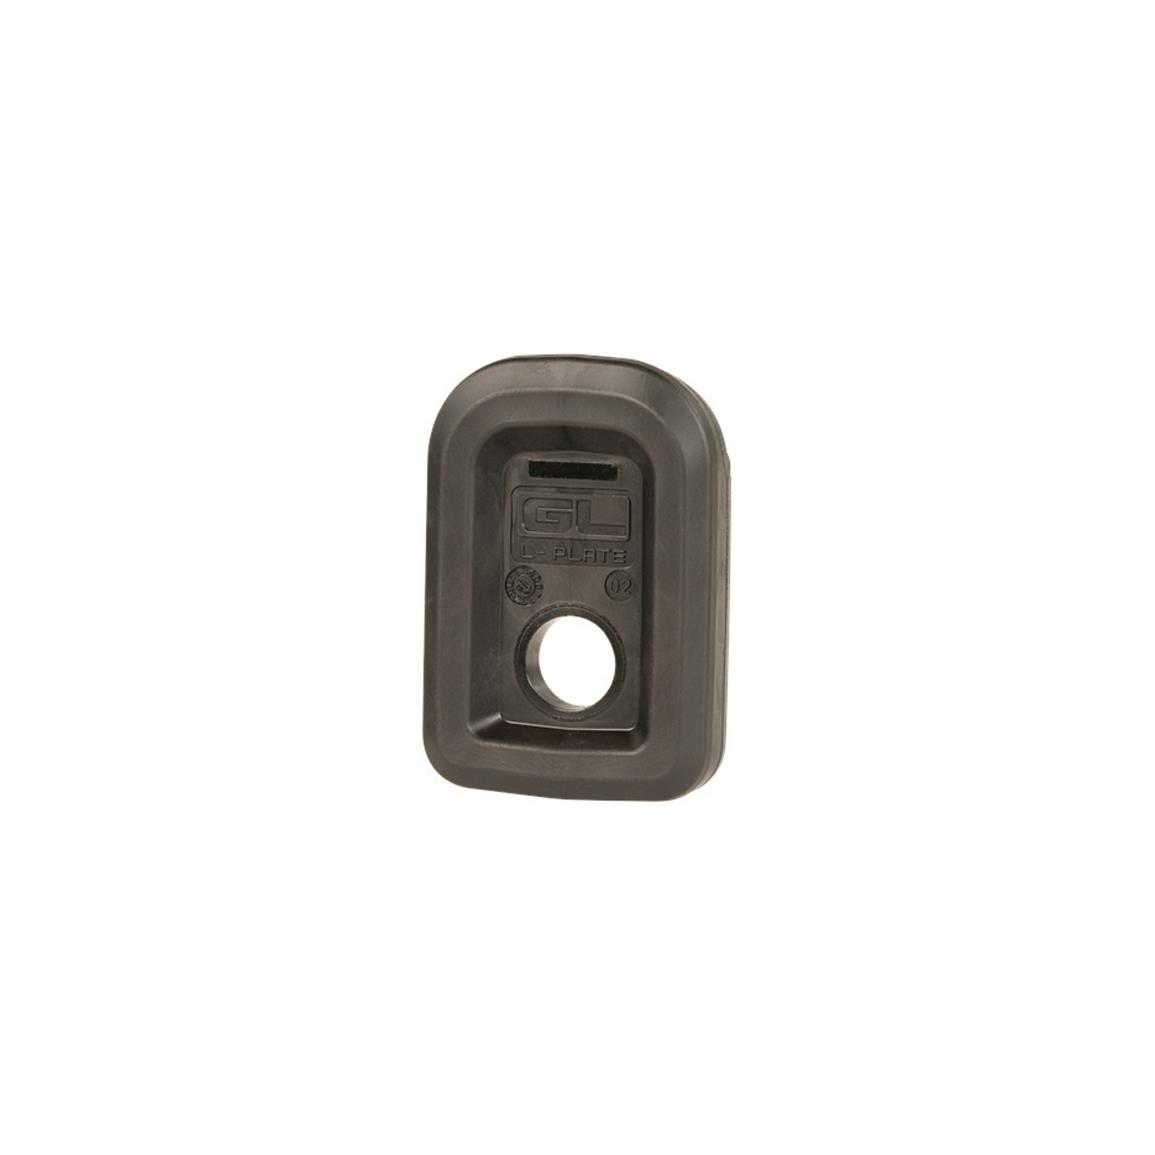 Magpul GL L-Plate For Magpul PMAG GL9 Magazines, Glock 19 Gen 1/2/3/4, 3 Pack